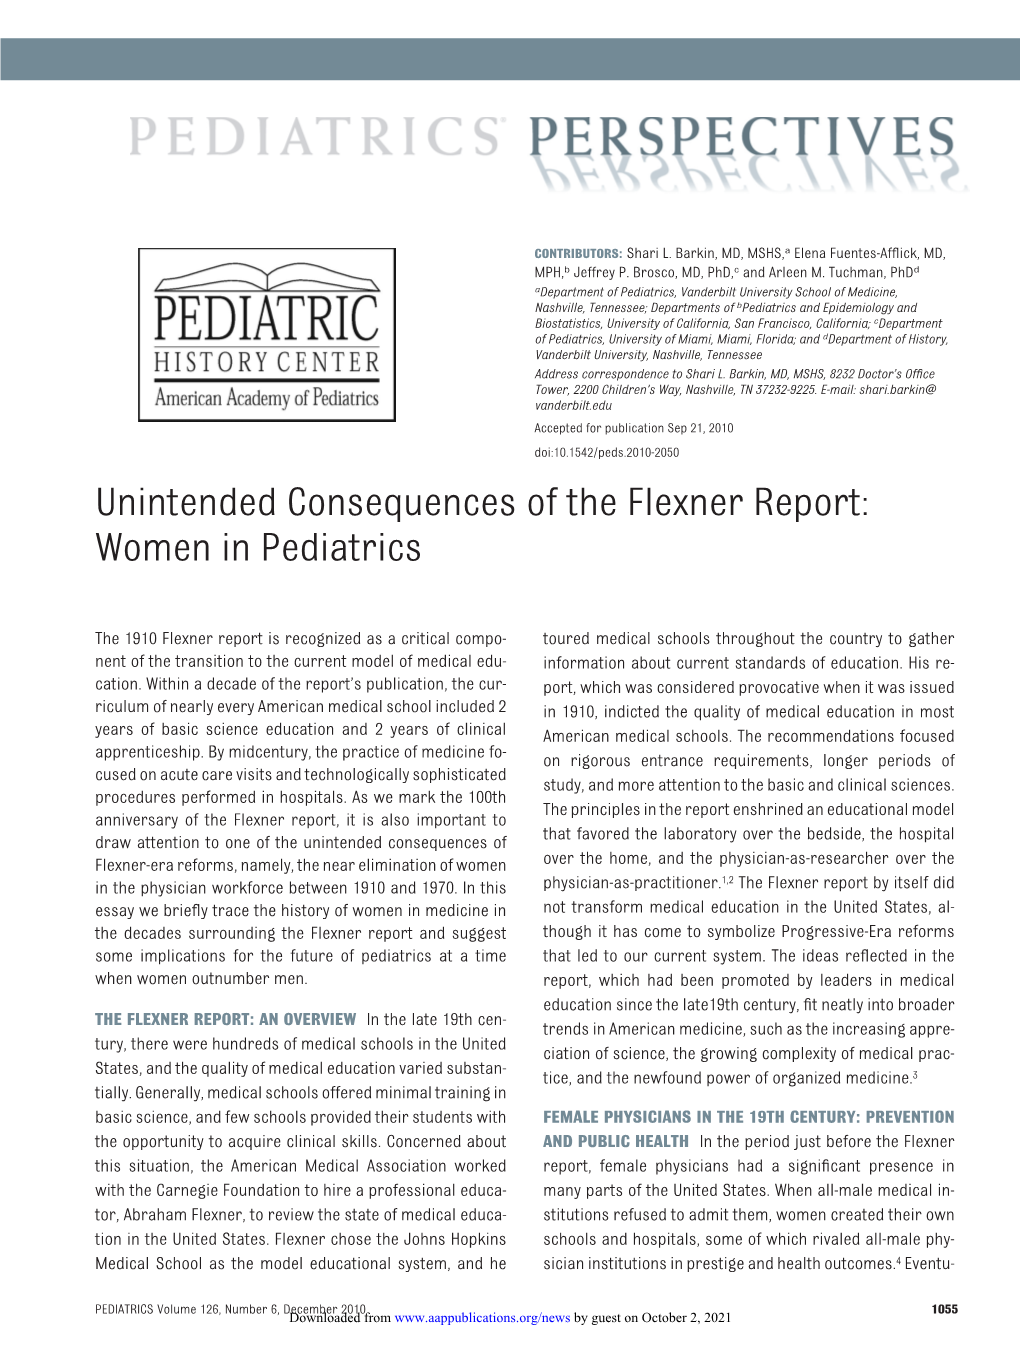 Unintended Consequences of the Flexner Report: Women in Pediatrics